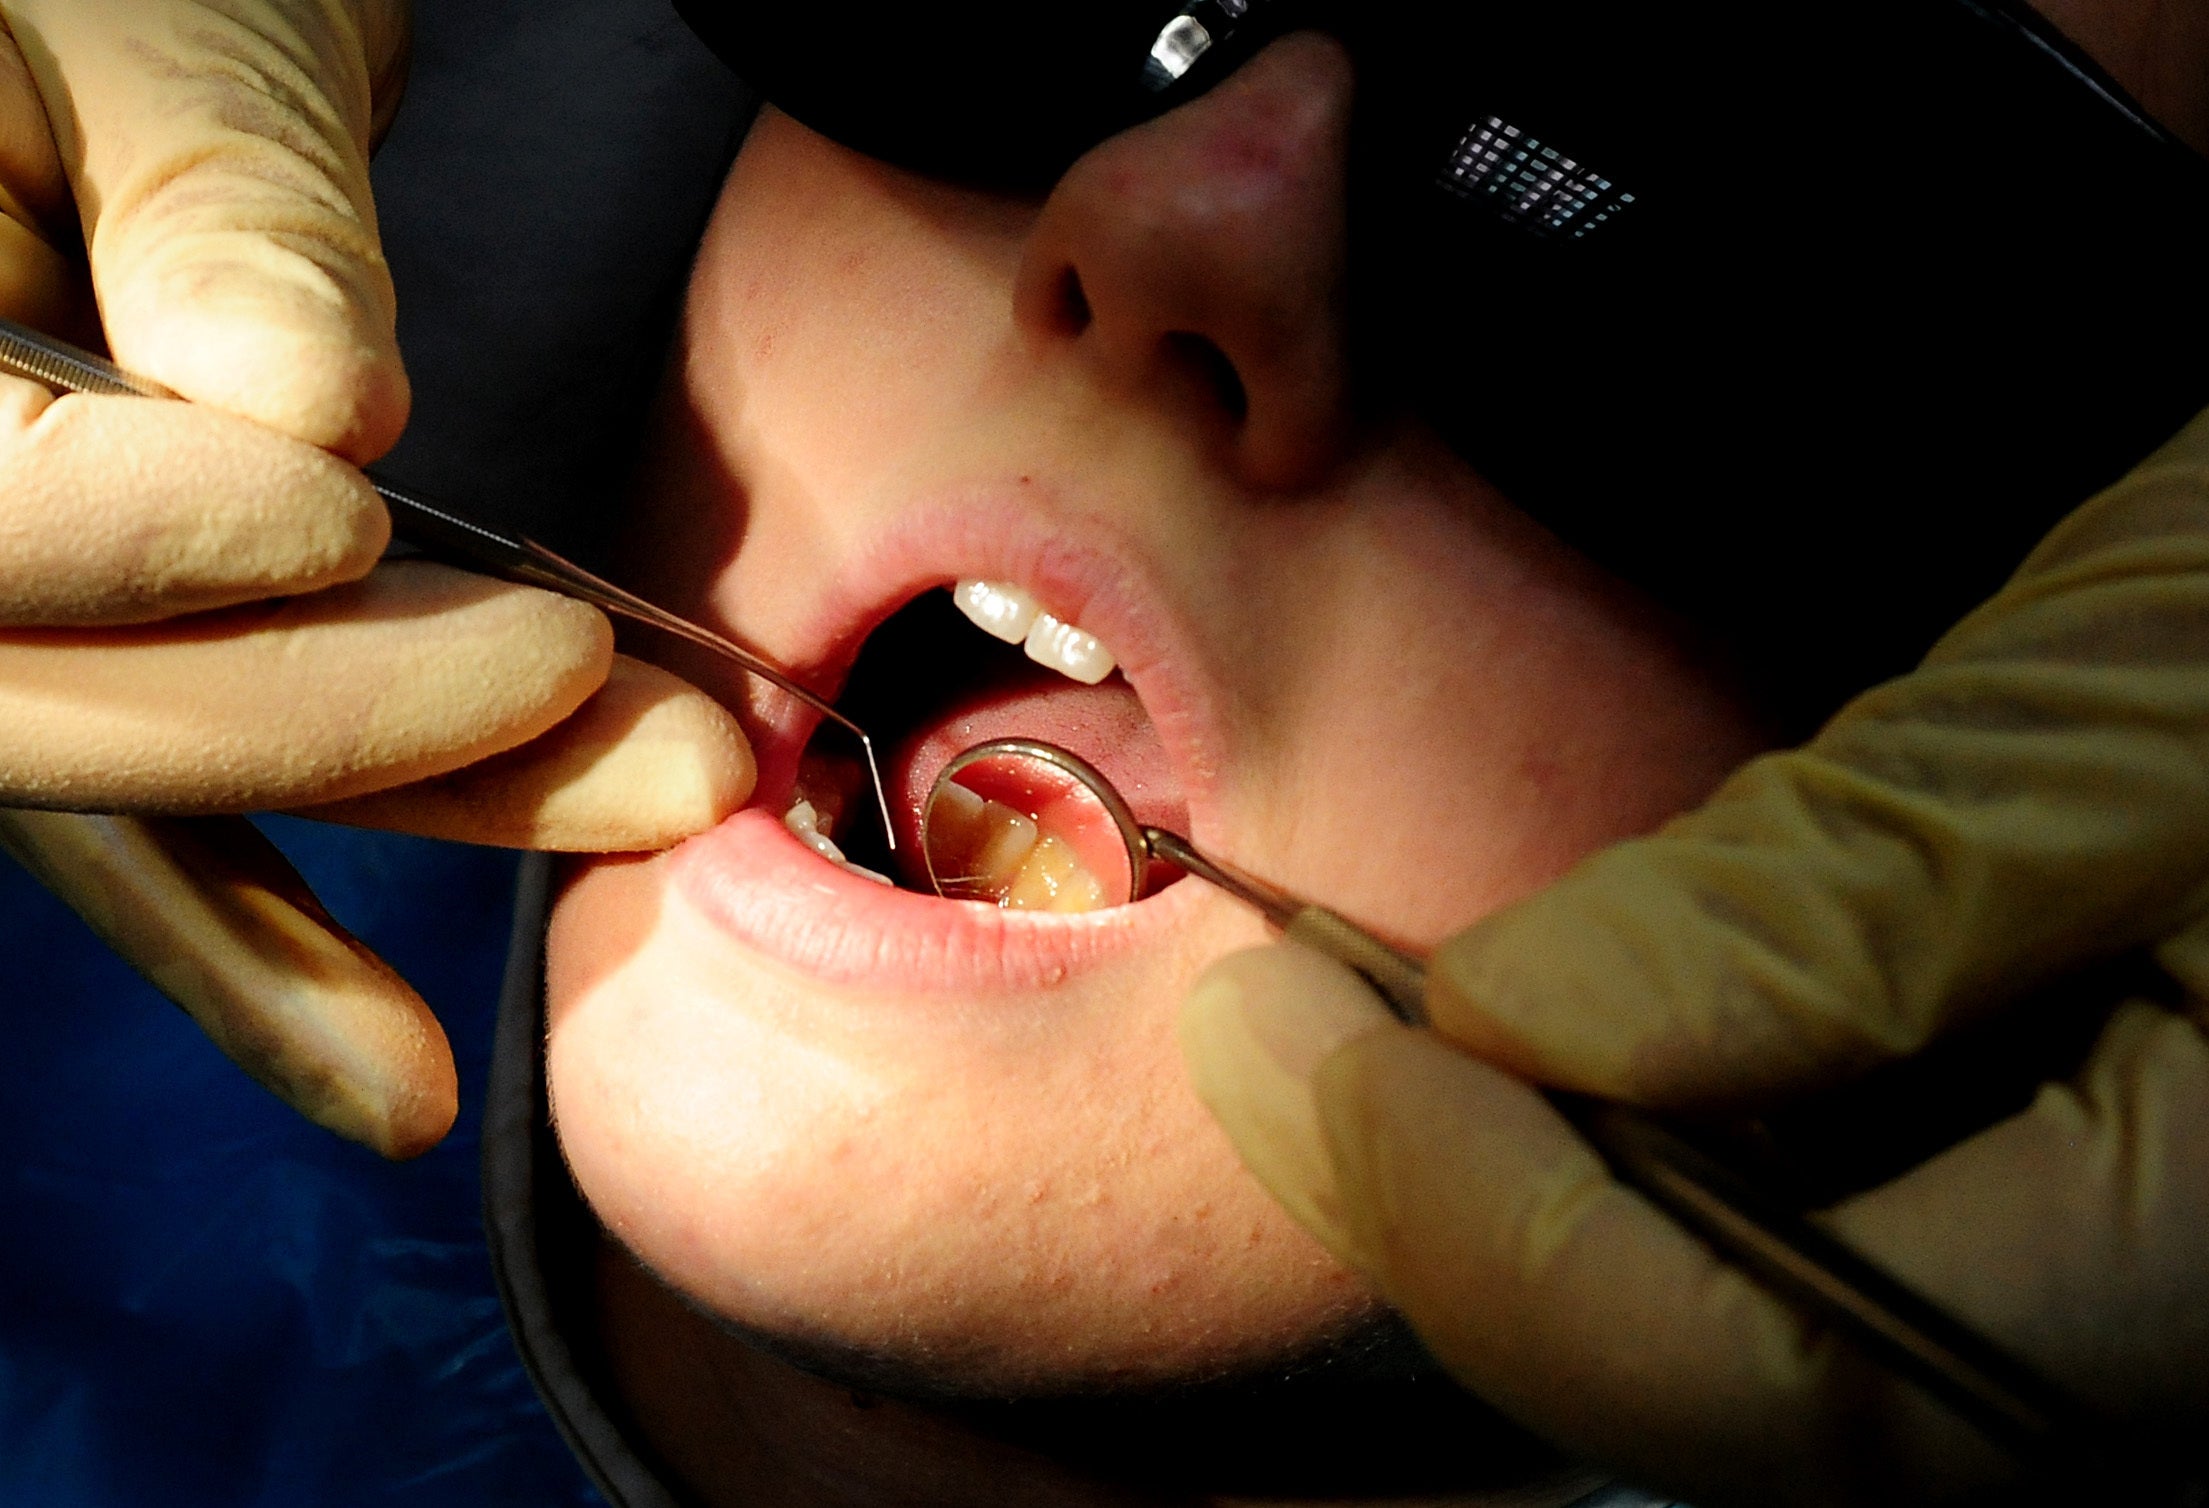 Half of all children’s tooth extractions in 2021-22 were due to preventable tooth decay